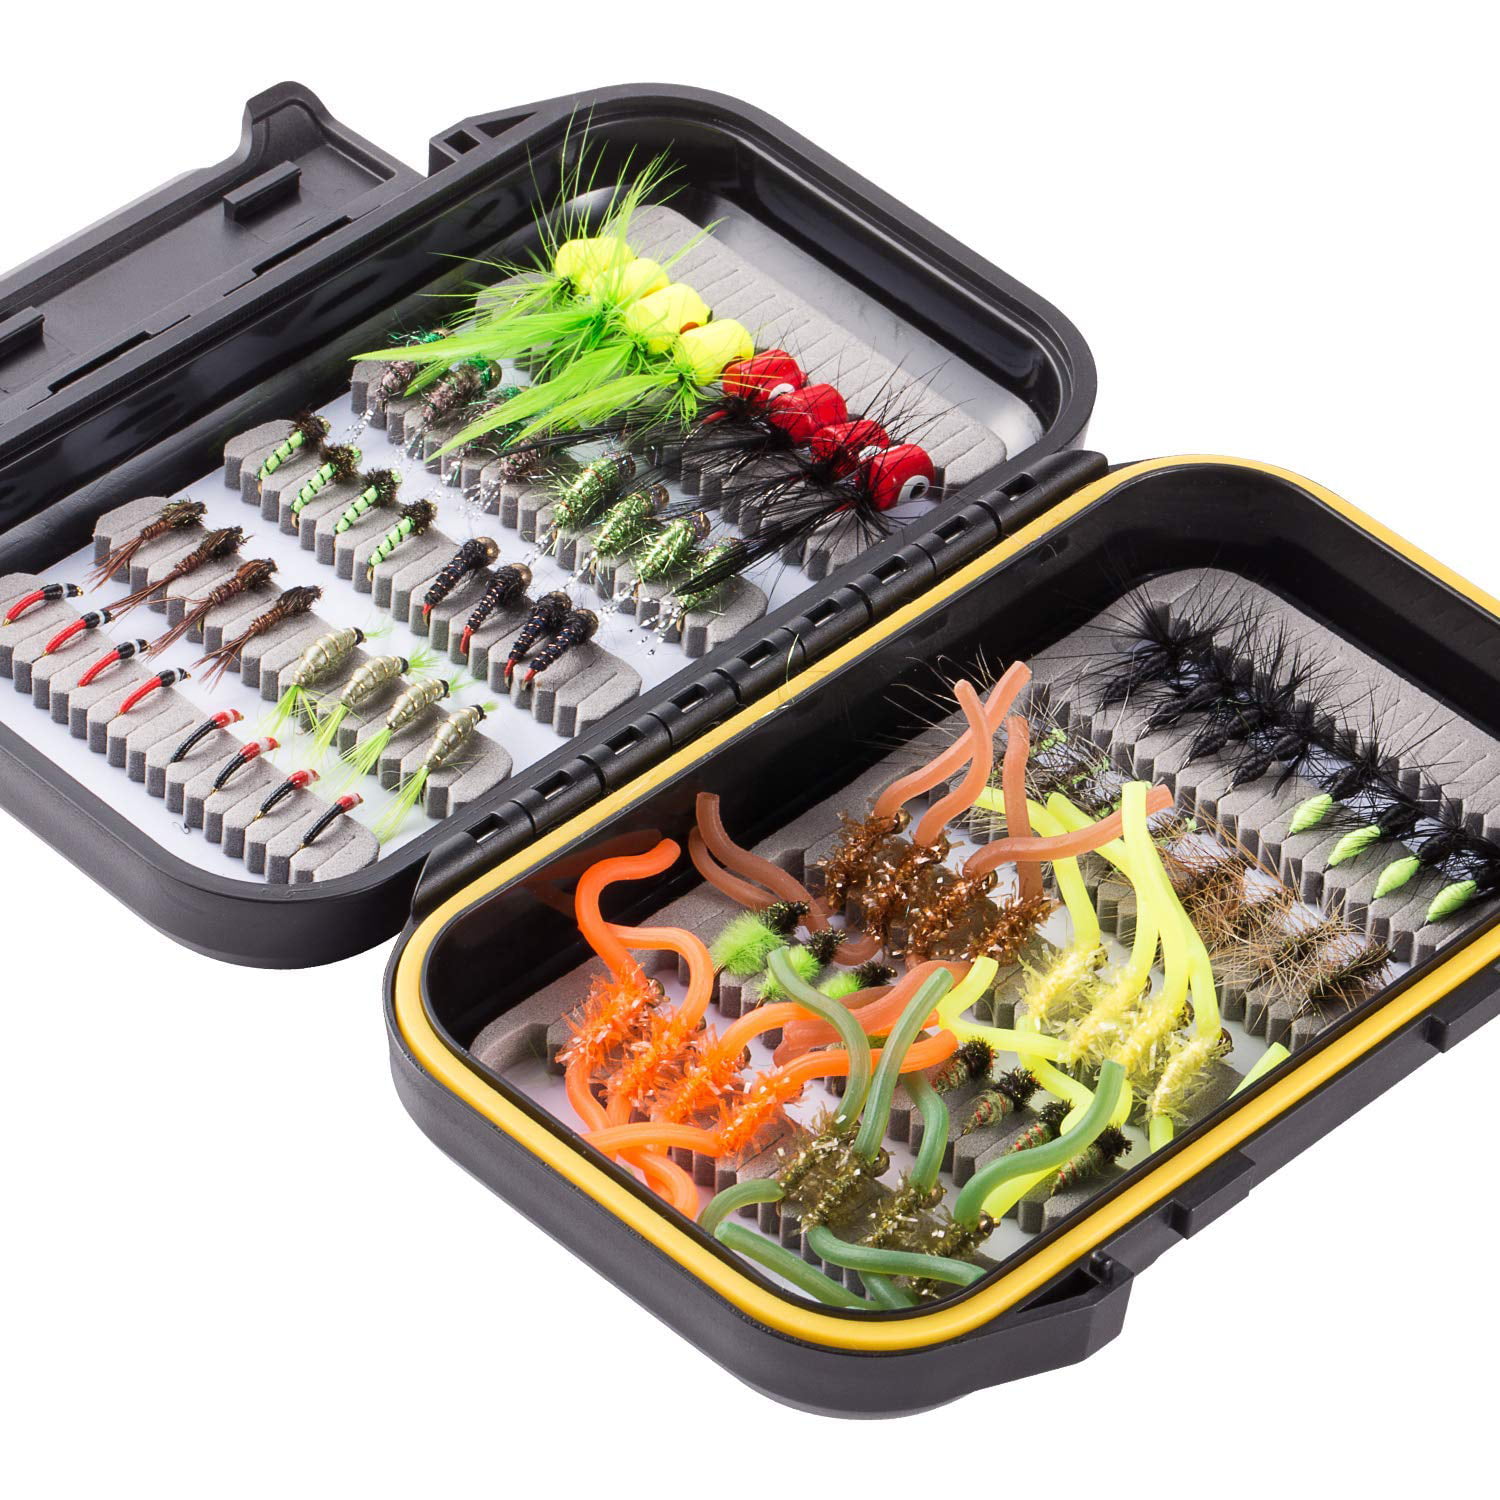 70pcs Premium Fly Fishing Flies Kit 120 Assorted Trout And Bass Flies With  Waterproof Fly Box Includes Dry, Wet, Nymphs, Worms, And Streamers Pe, Fly  Fishing Gear For Beginners